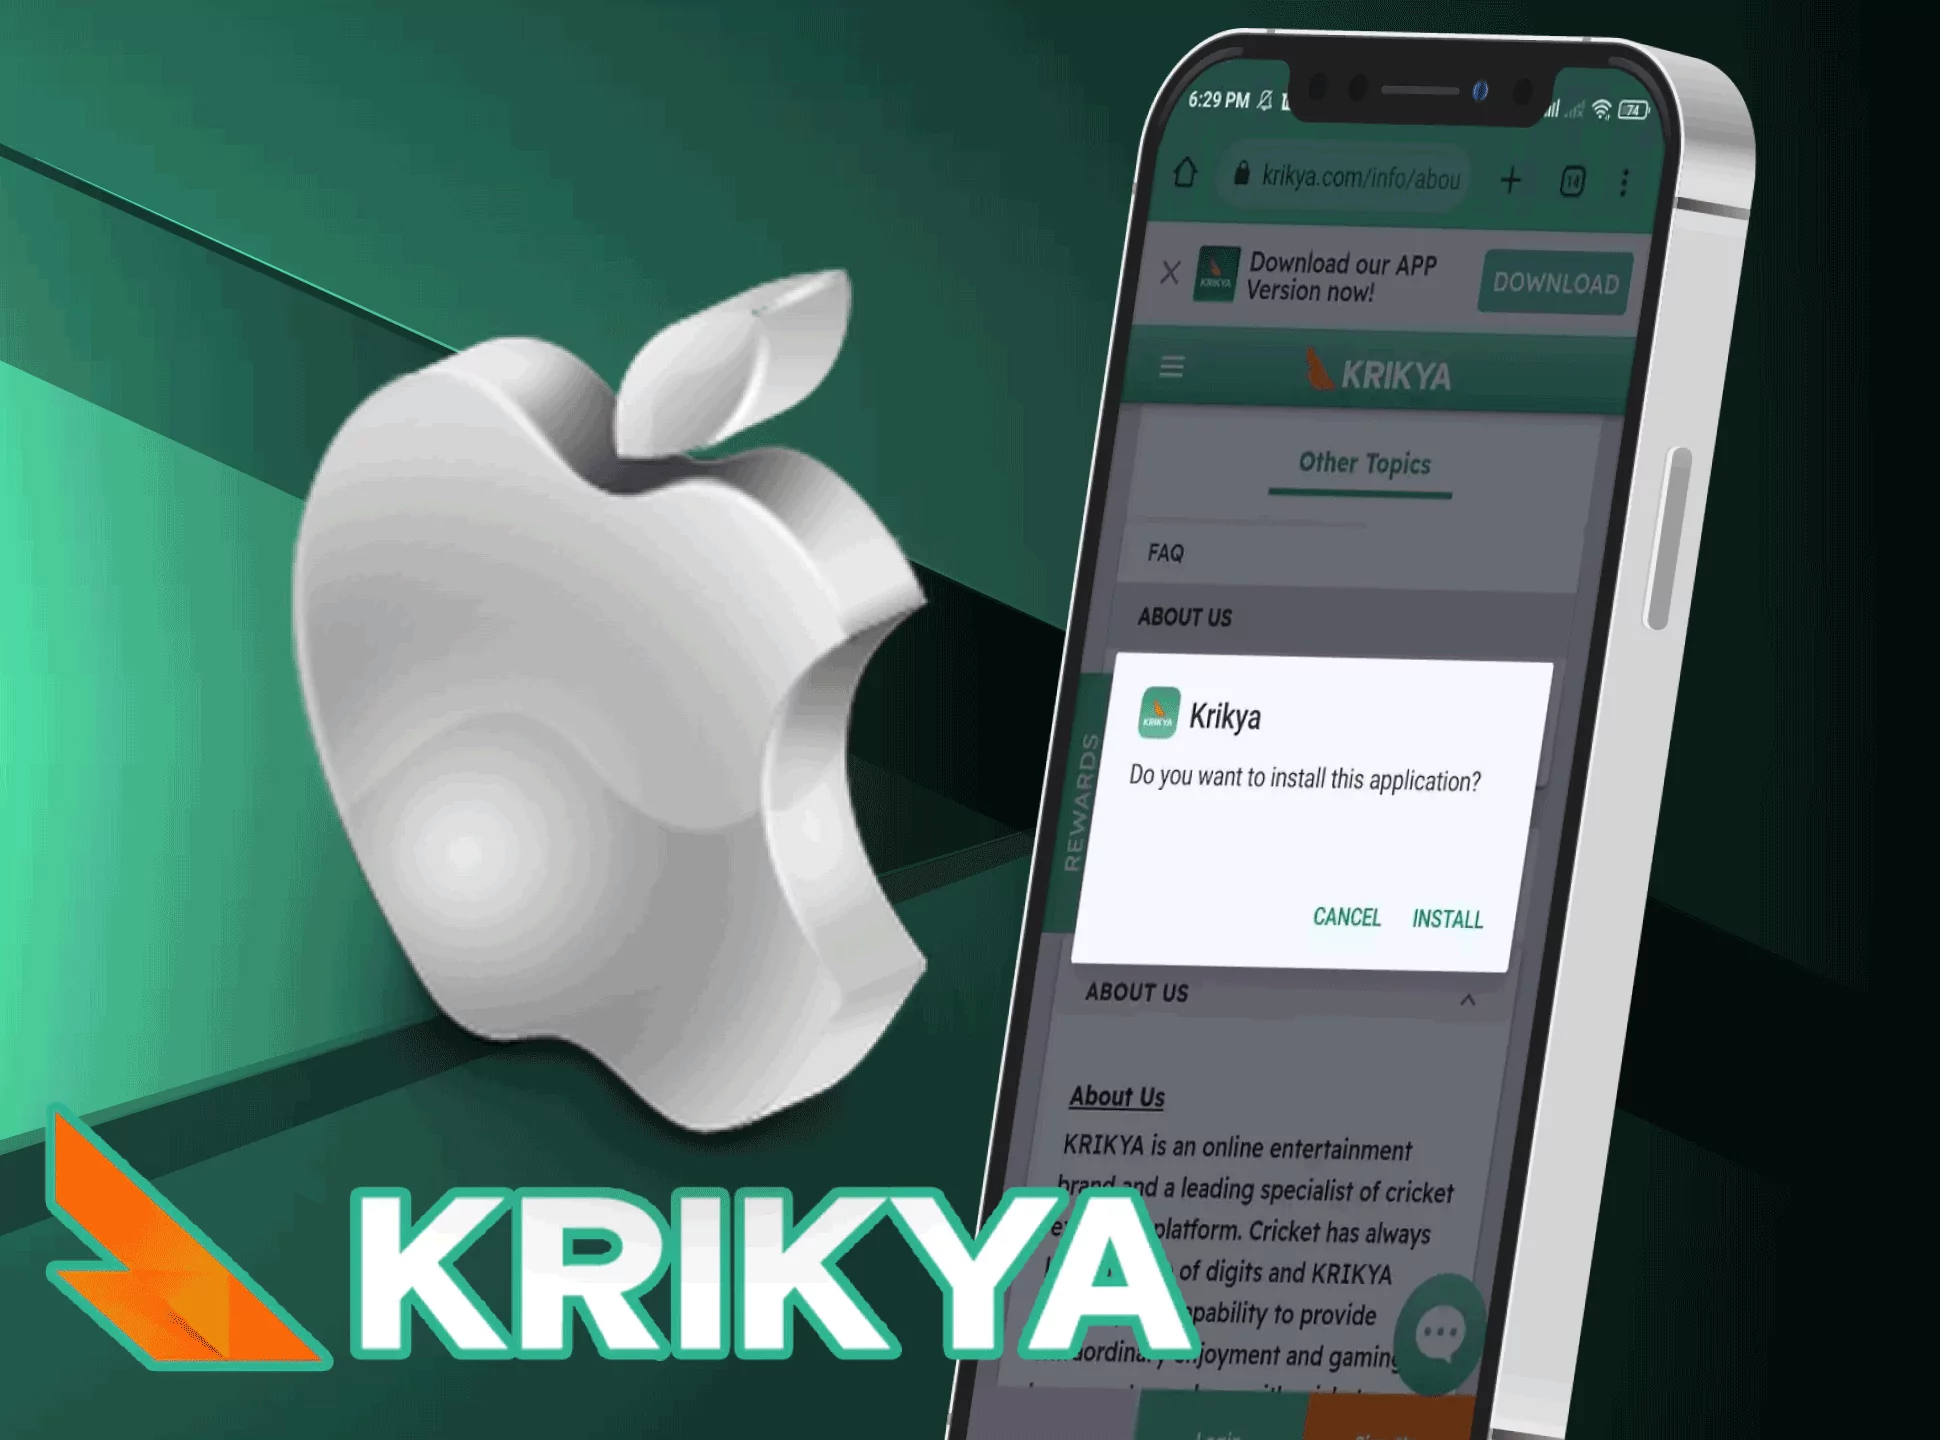 Download the Krikya app on your iPhone or iPad.